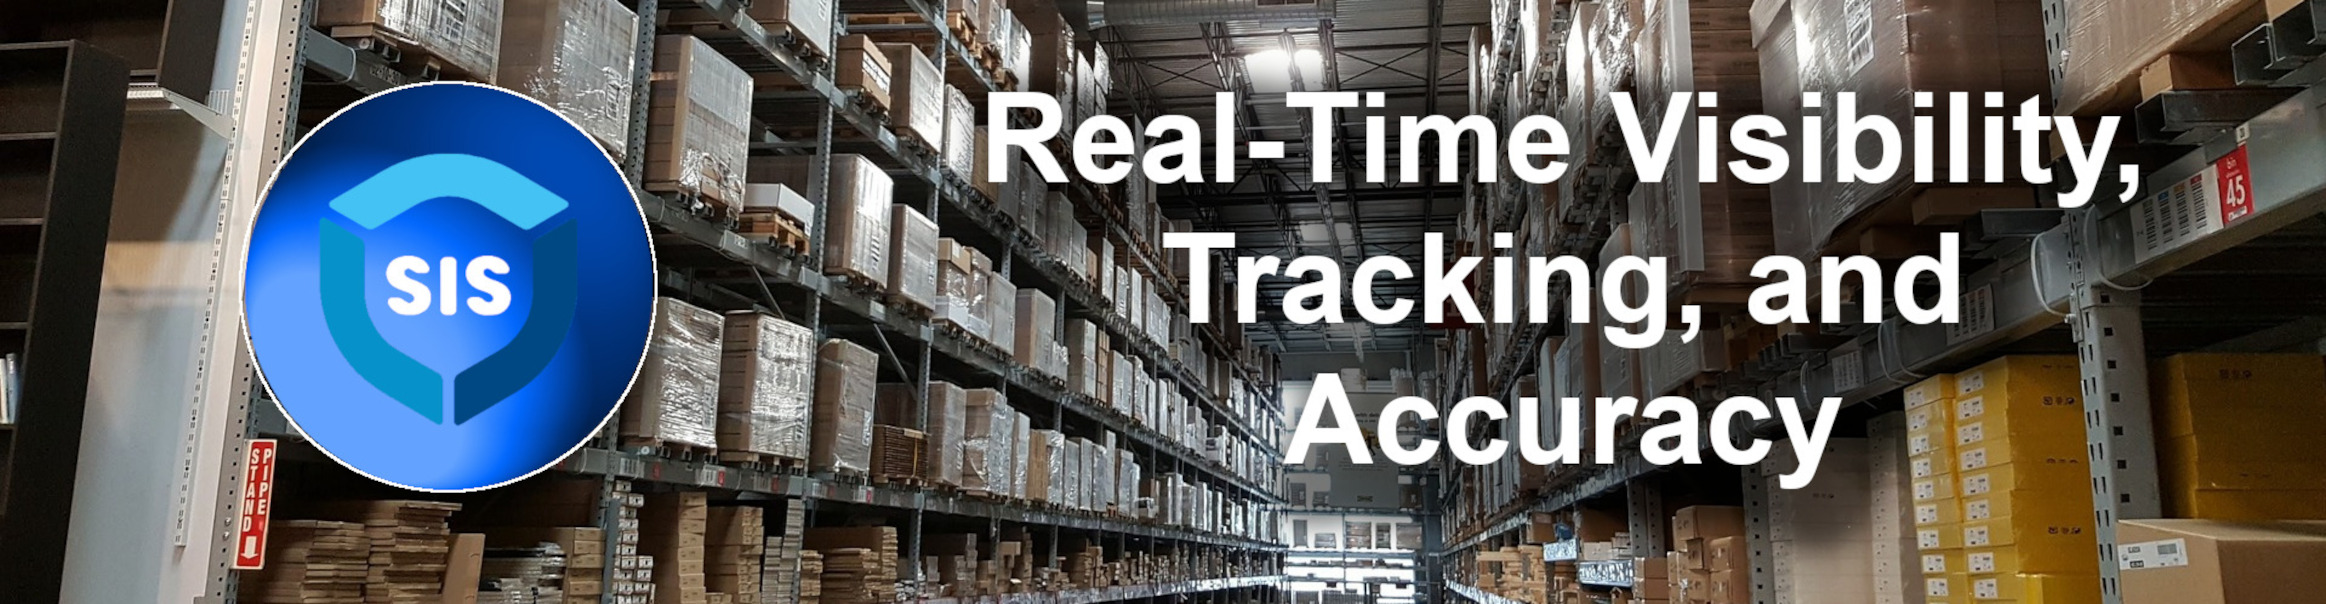 The total solution for better inventory accuracy. RFID for real-time visibility, tracking, and accuracy.